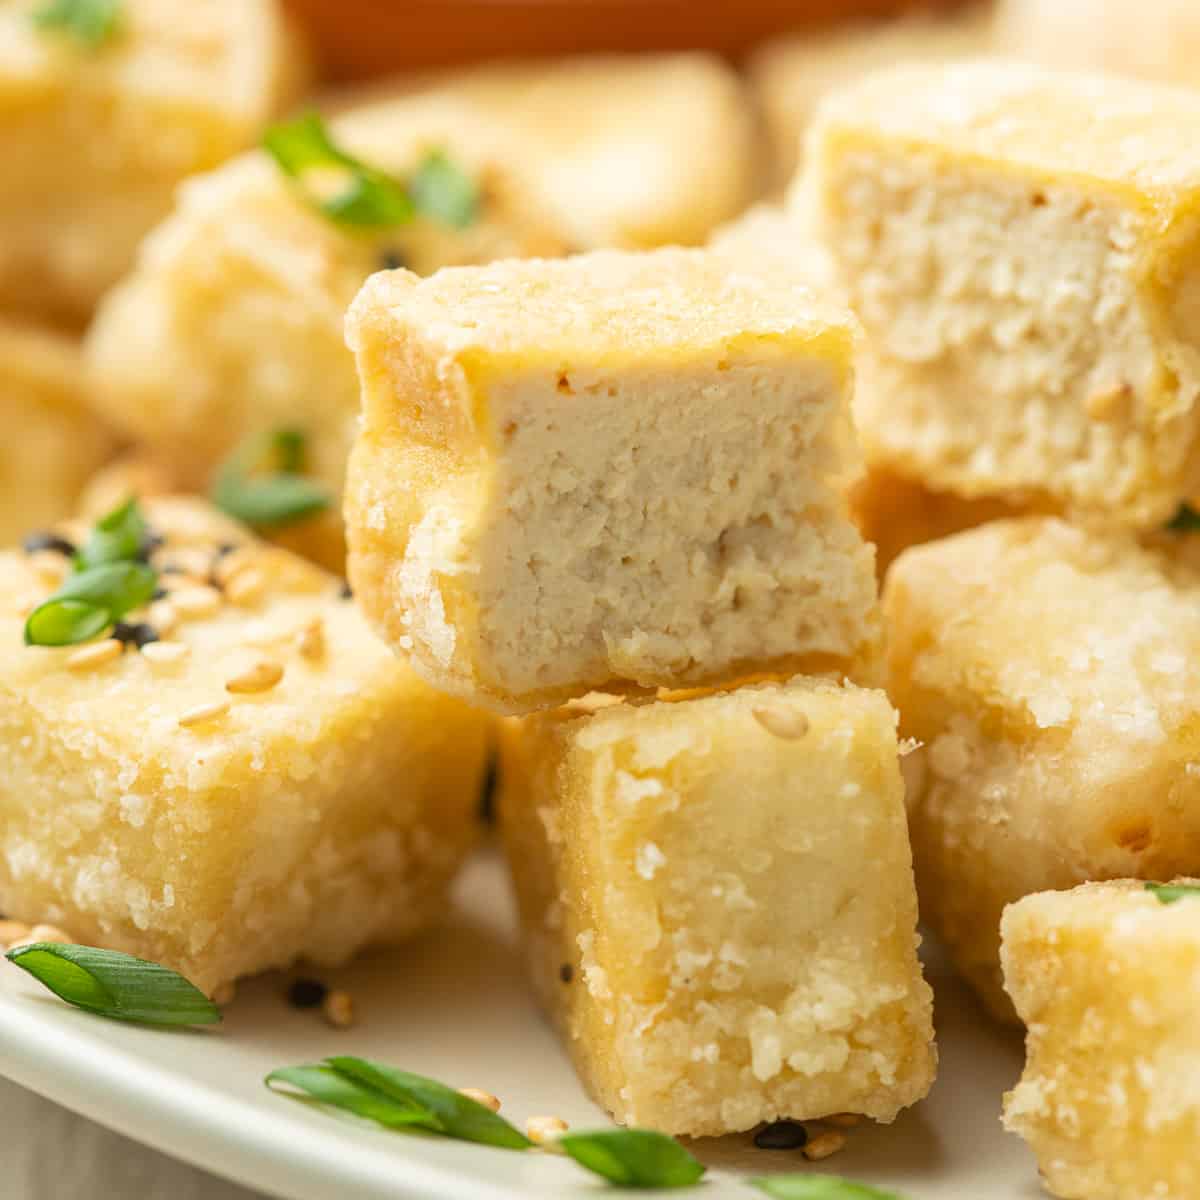 Close up of a piece of Fried Tofu cut in half on a plate with additional fried tofu pieces.